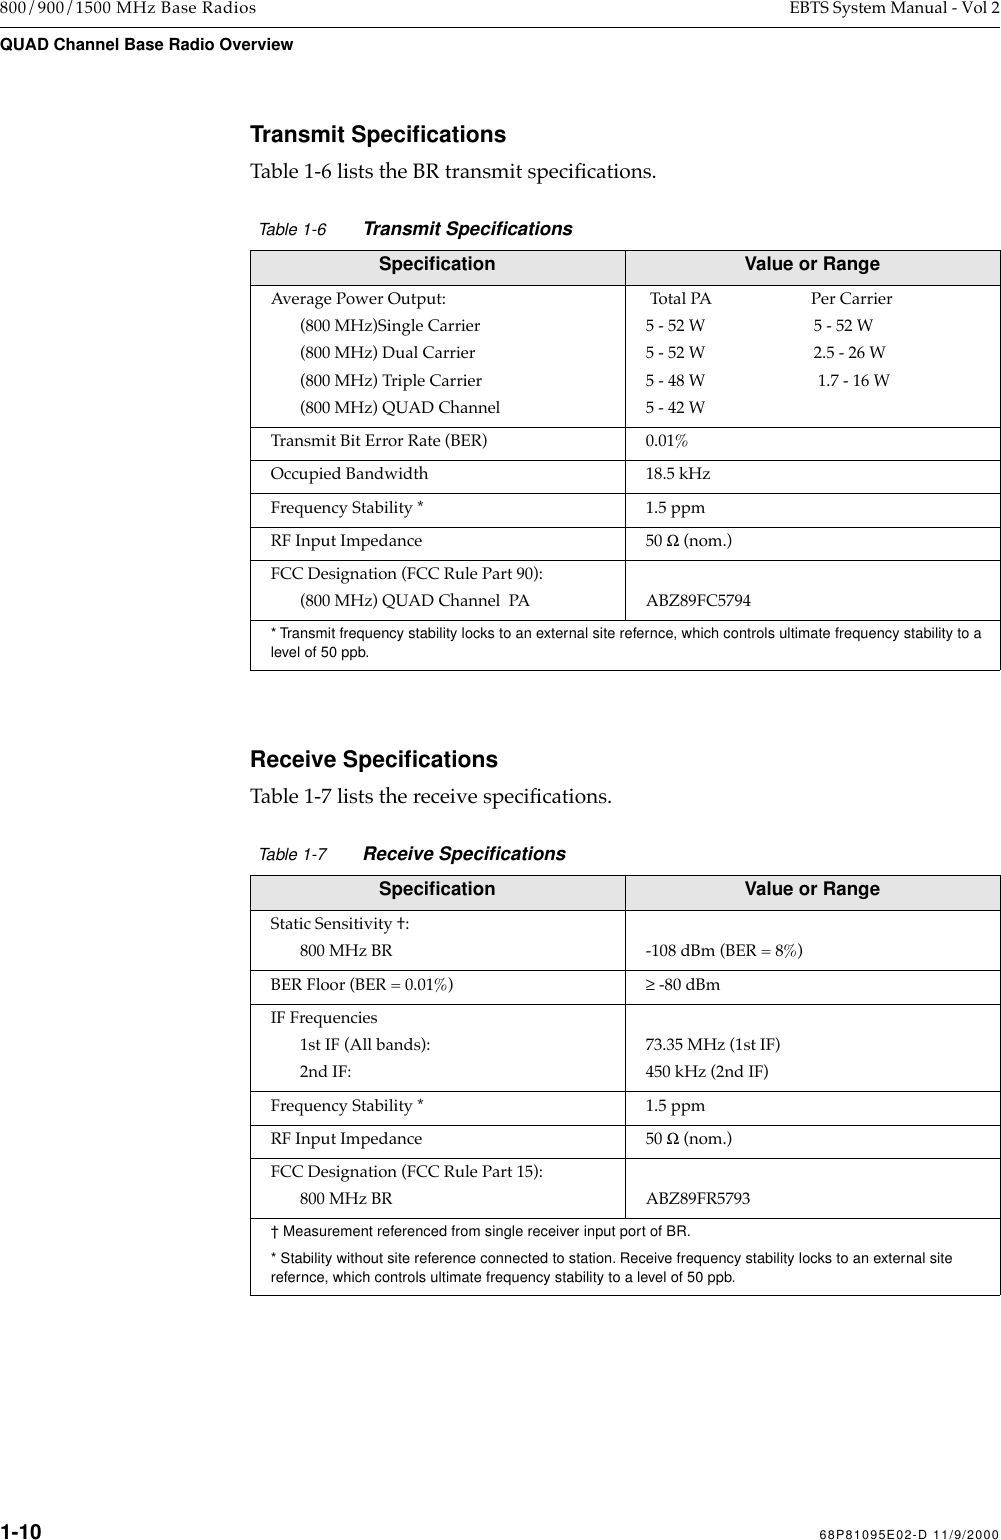  1-10 68P81095E02-D 11/9/2000 800/900/1500 MHz Base Radios EBTS System Manual - Vol 2 QUAD Channel Base Radio Overview Transmit Speciﬁcations Table 1-6 lists the BR transmit speciÞcations. Receive Speciﬁcations Table 1-7 lists the receive speciÞcations.      Table 1-6   Transmit Speciﬁcations   Speciﬁcation Value or Range Average Power Output:(800 MHz)Single Carrier(800 MHz) Dual Carrier(800 MHz) Triple Carrier(800 MHz) QUAD Channel Total PA                        Per Carrier5 - 52 W                          5 - 52 W5 - 52 W                          2.5 - 26 W5 - 48 W                           1.7 - 16 W5 - 42 WTransmit Bit Error Rate (BER) 0.01%Occupied Bandwidth 18.5 kHzFrequency Stability * 1.5 ppmRF Input Impedance 50  Ω  (nom.)FCC Designation (FCC Rule Part 90):(800 MHz) QUAD Channel  PA ABZ89FC5794 * Transmit frequency stability locks to an external site refernce, which controls ultimate frequency stability to a level of 50 ppb. Table 1-7   Receive Speciﬁcations  Speciﬁcation Value or Range Static Sensitivity  :800 MHz BR  -108 dBm (BER = 8%)BER Floor (BER = 0.01%) ≥  -80 dBmIF Frequencies1st IF (All bands):2nd IF:73.35 MHz (1st IF)450 kHz (2nd IF)Frequency Stability * 1.5 ppmRF Input Impedance 50  Ω  (nom.)FCC Designation (FCC Rule Part 15):800 MHz BR  ABZ89FR5793 † Measurement referenced from single receiver input port of BR.* Stability without site reference connected to station. Receive frequency stability locks to an external site refernce, which controls ultimate frequency stability to a level of 50 ppb.